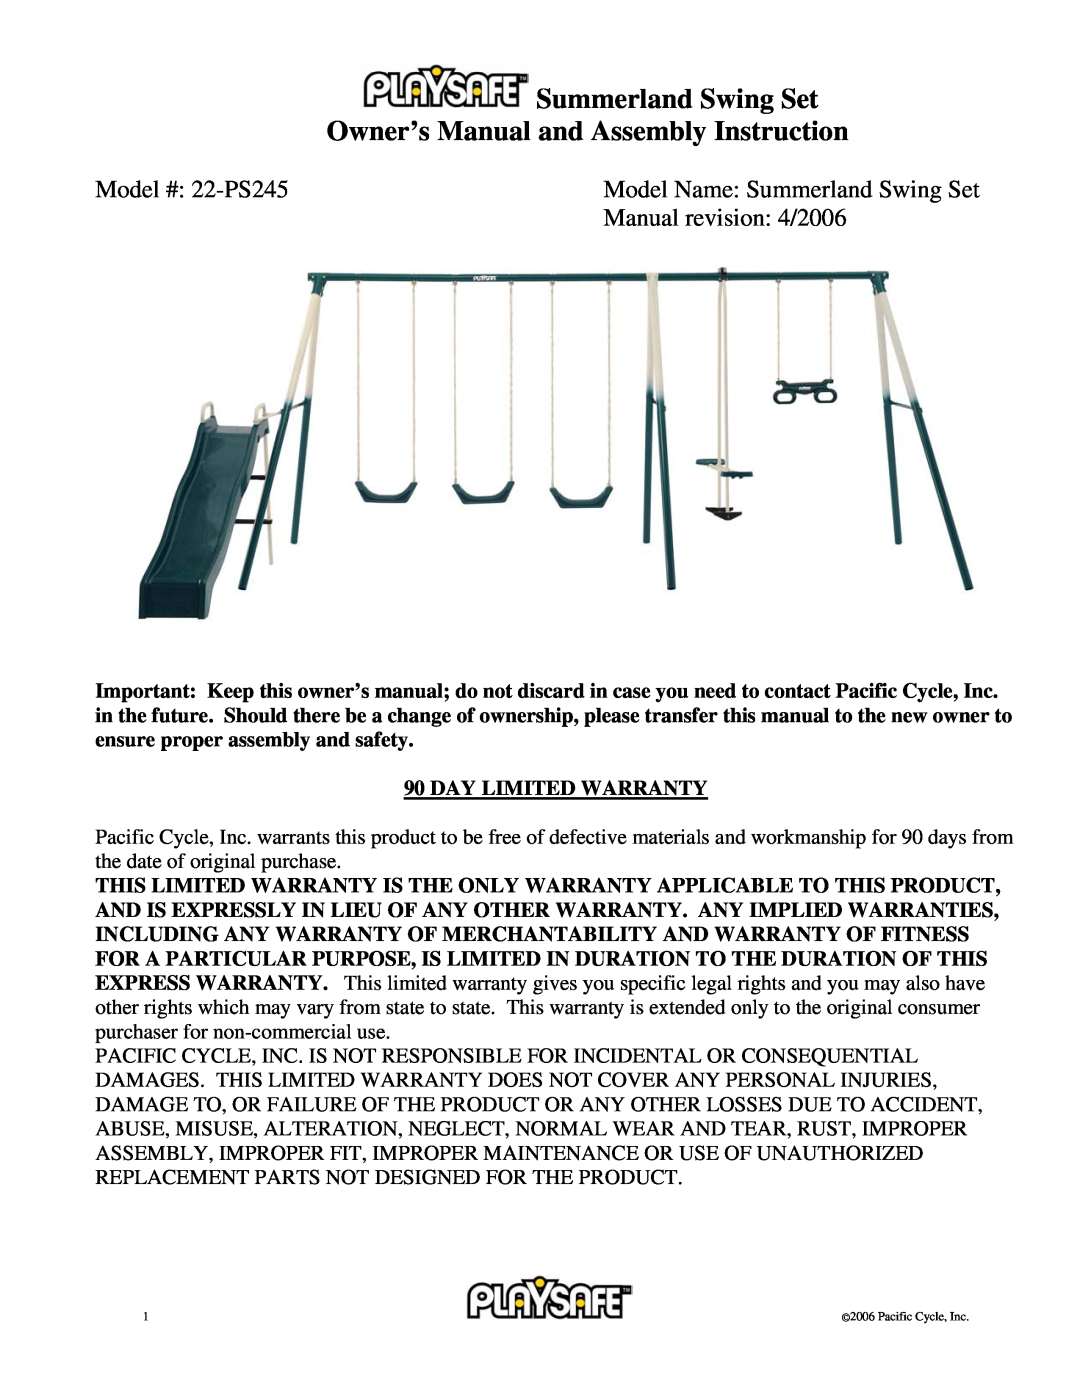 Pacific Cycle owner manual Summerland Swing Set, Owner’s Manual and Assembly Instruction, Model #: 22-PS245 